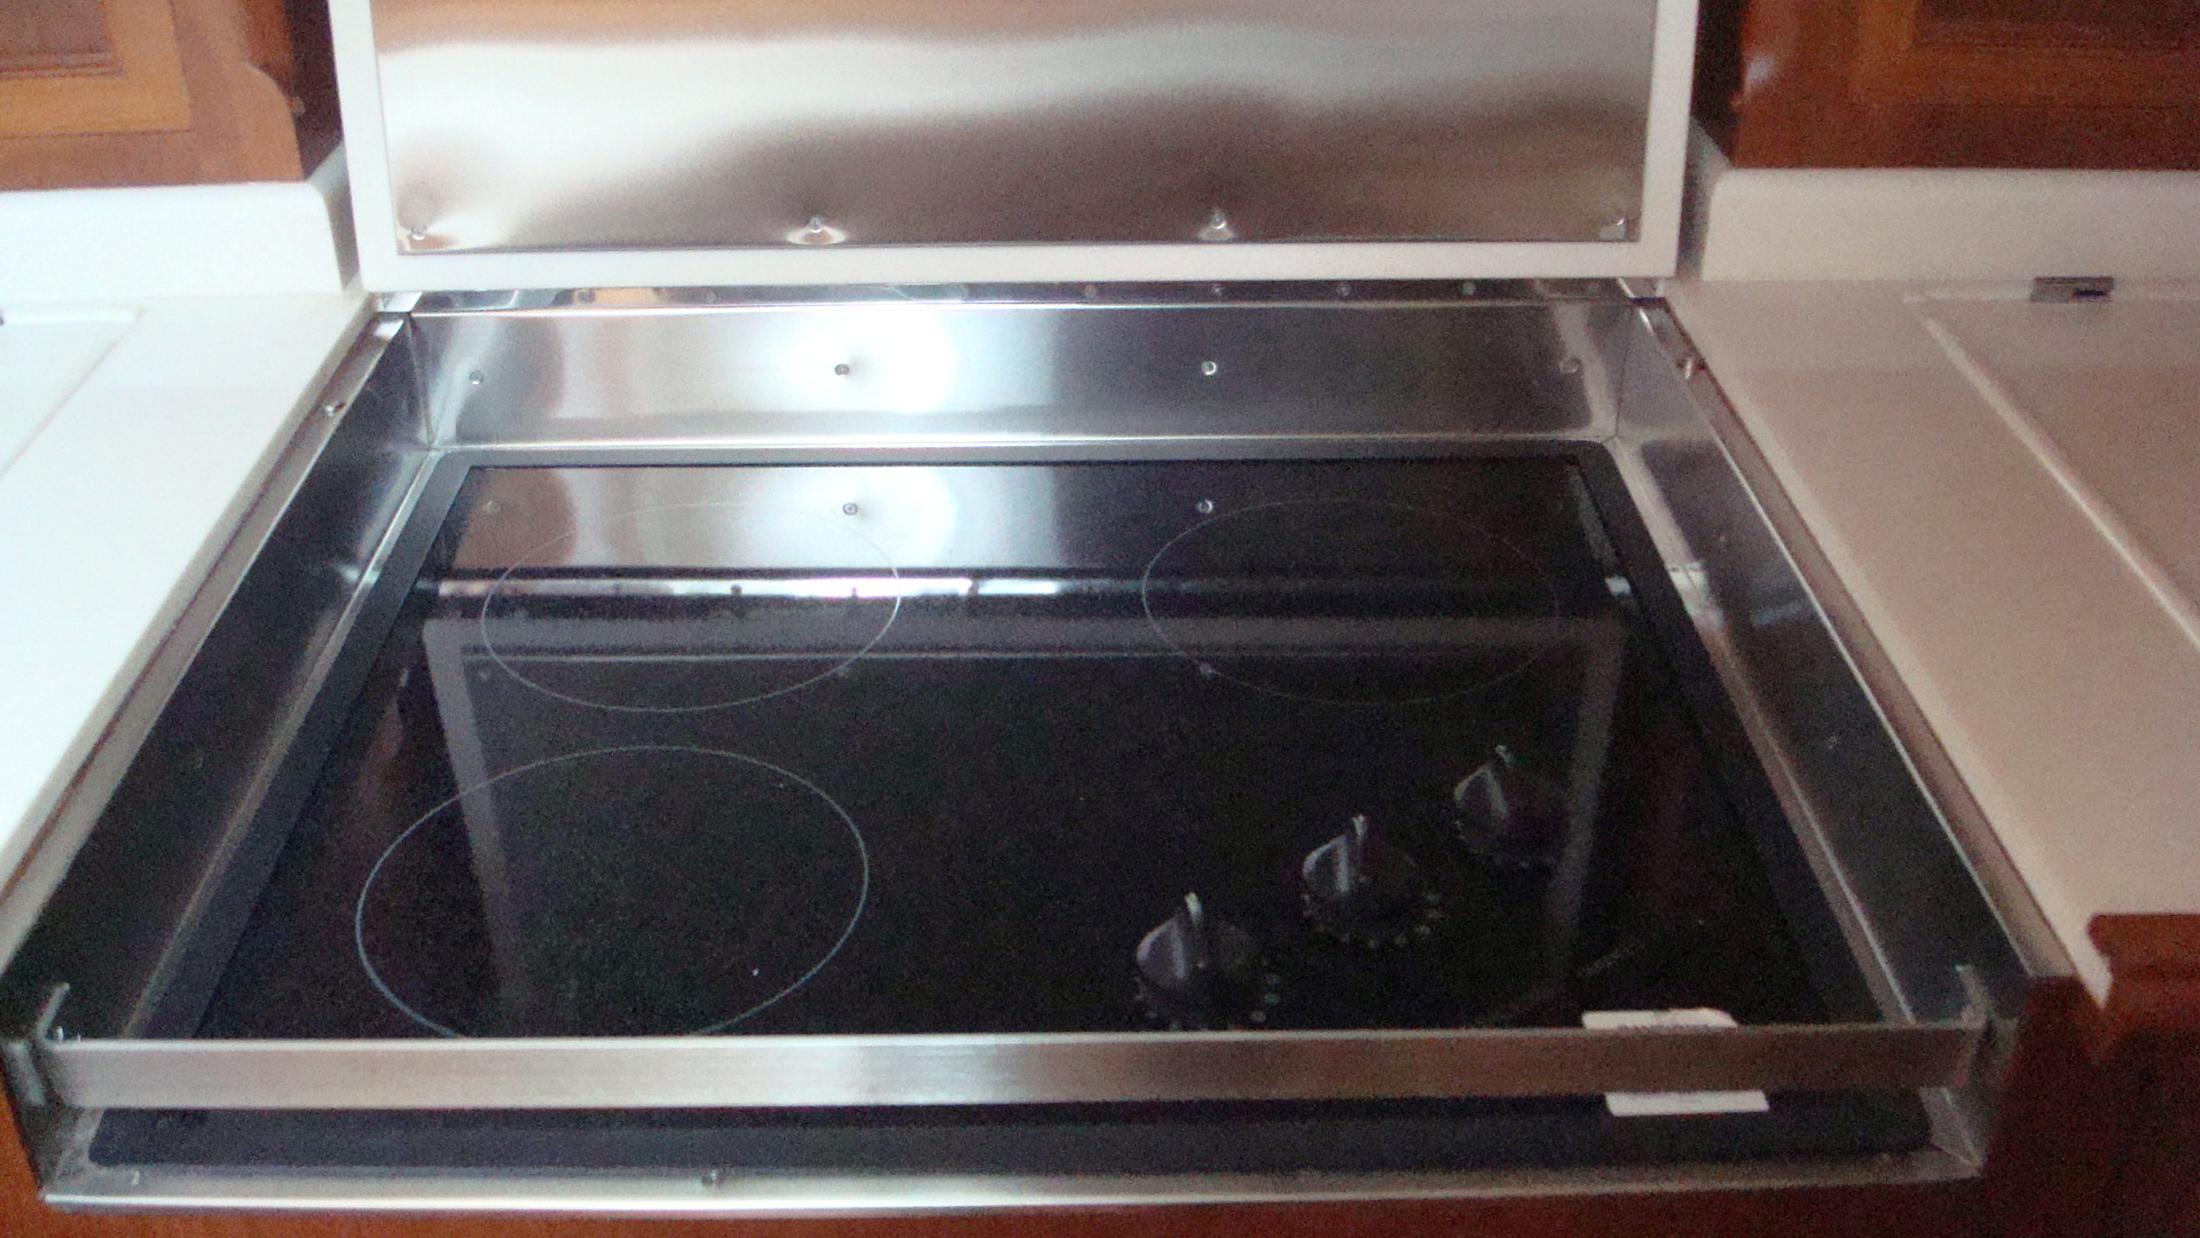 Smooth Top Galley Stove